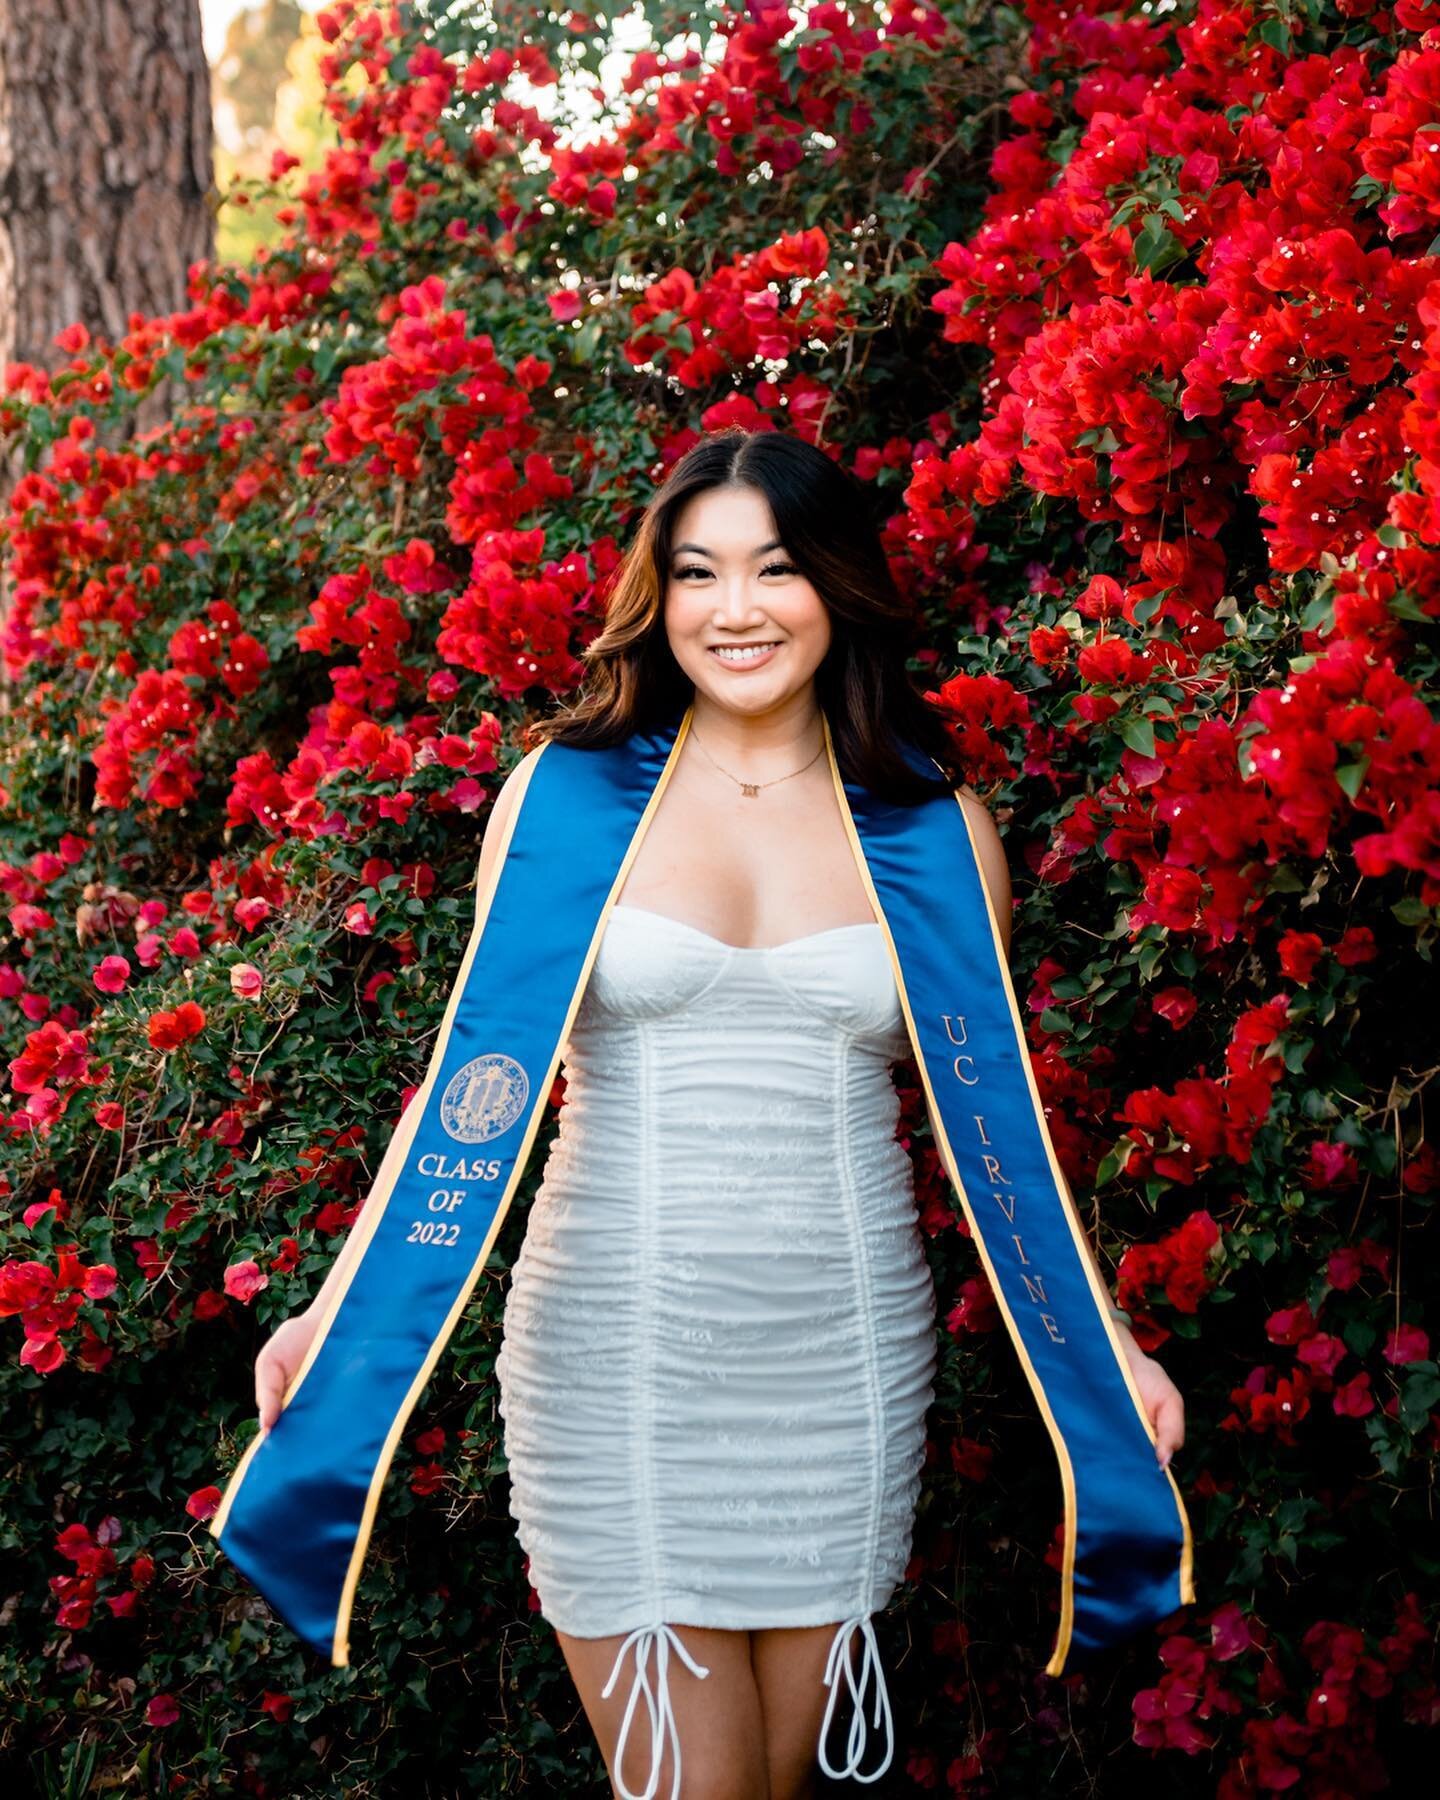 One last grad photos update! And then I&rsquo;ll have recap tomorrow or Friday to &ldquo;unofficially&rdquo; end my grad season. 🍾
&mdash;
UC Irvine and UC Riverside are both done now! That leaves UC San Diego as the last UC on my list. Just FYI, I&